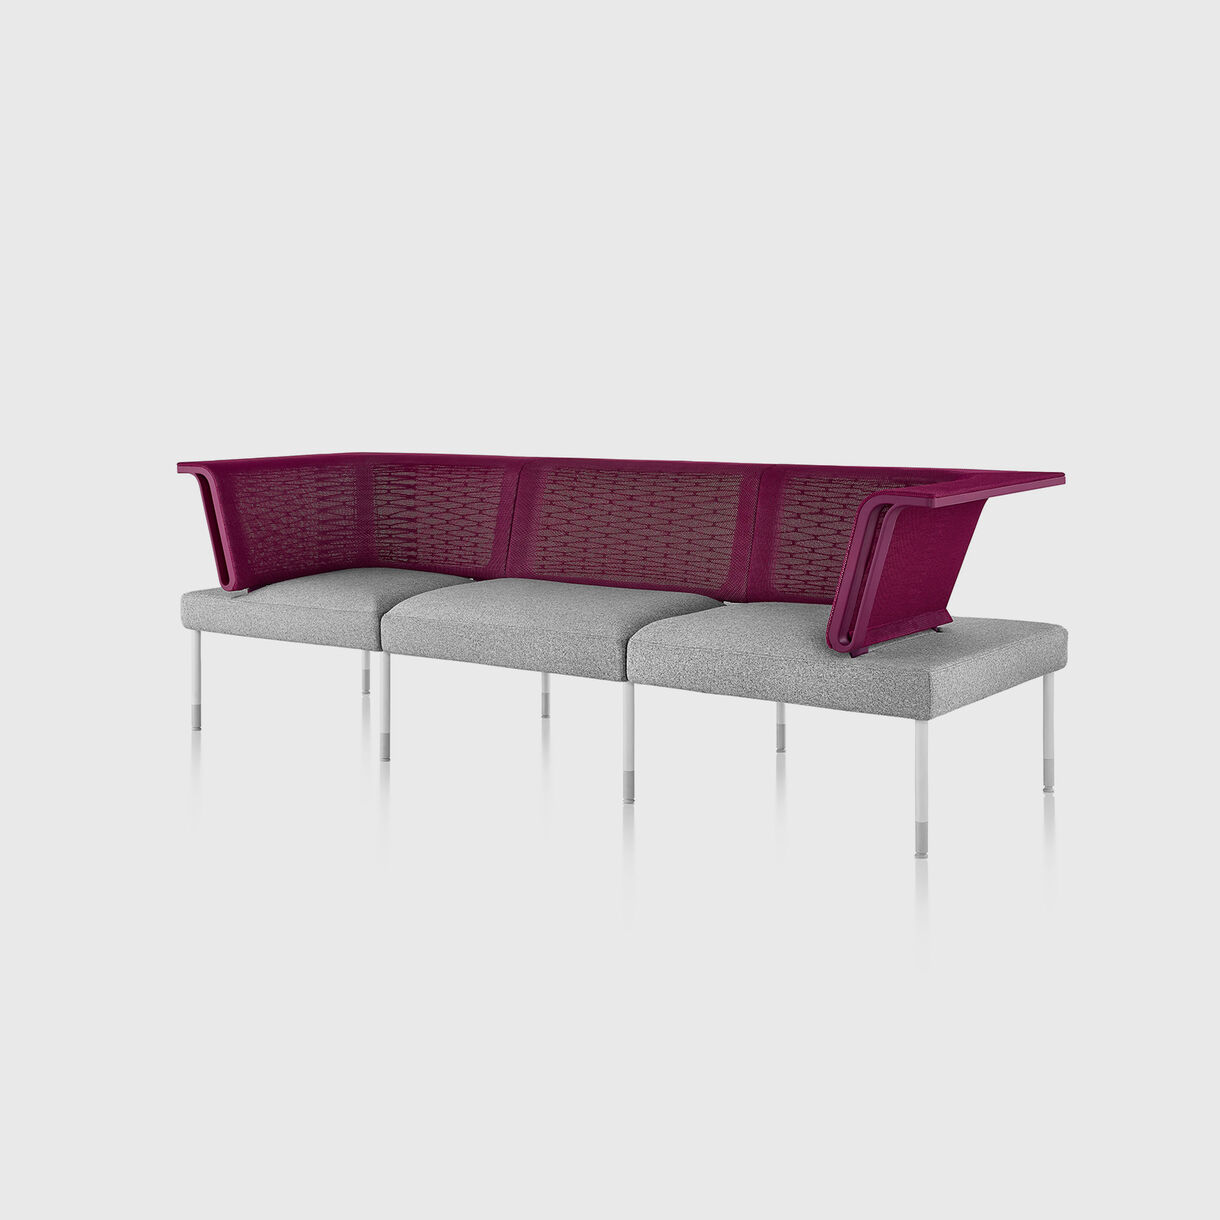 Public Office Sectional Seating, Lifestyle